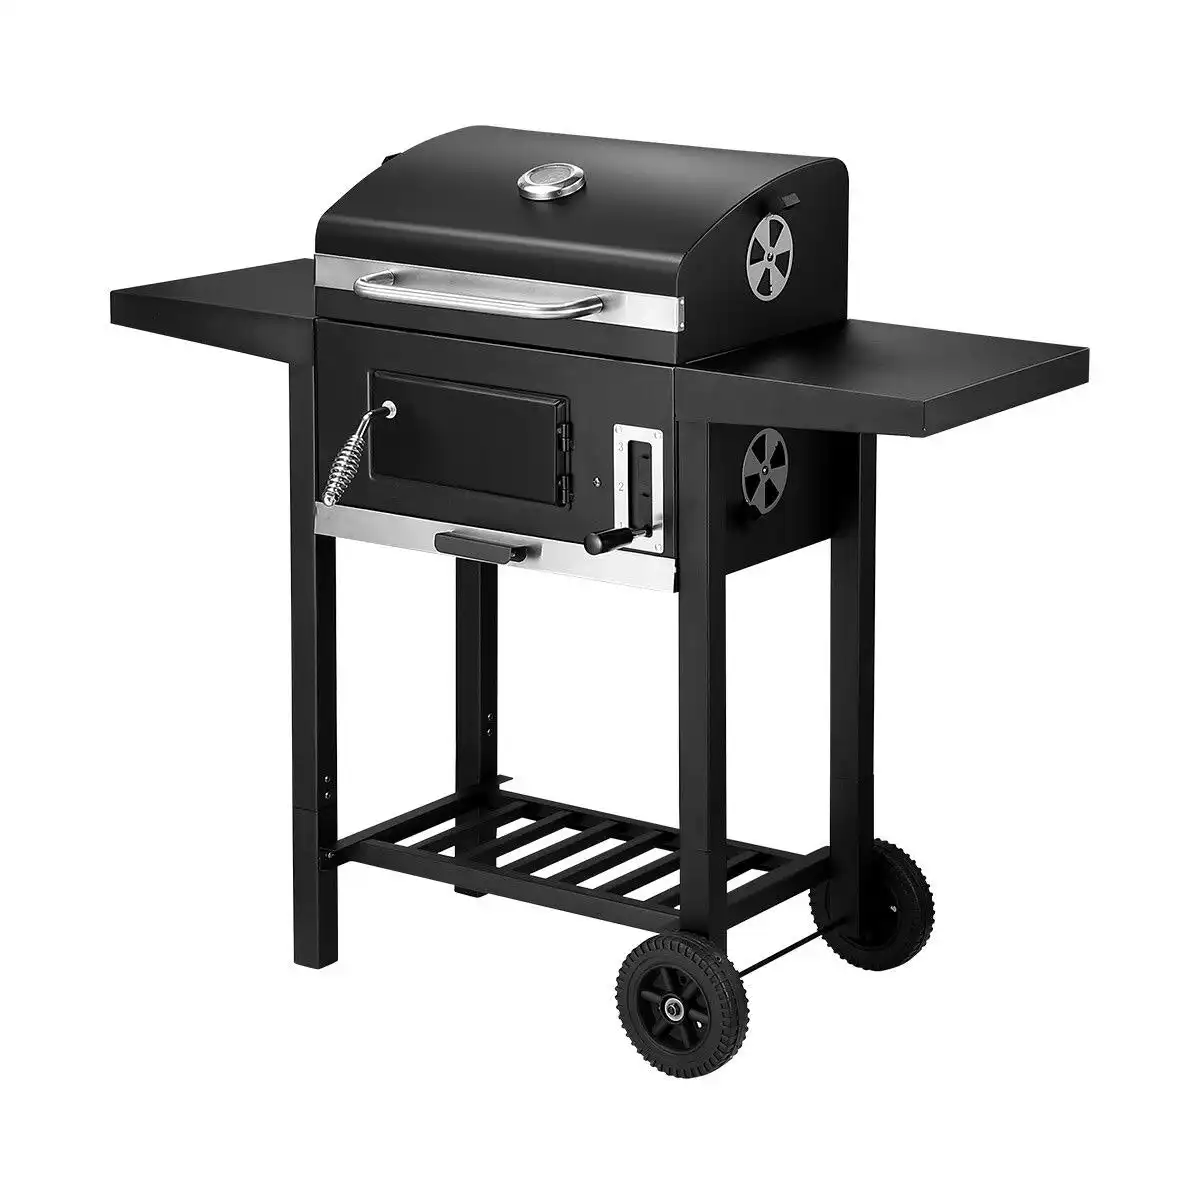 Ausway Aluminium Charcoal BBQ Grill Trolley Portable Cooking Grill Outdoor Barbecue Set for Picnic Patio Backyard Cooking